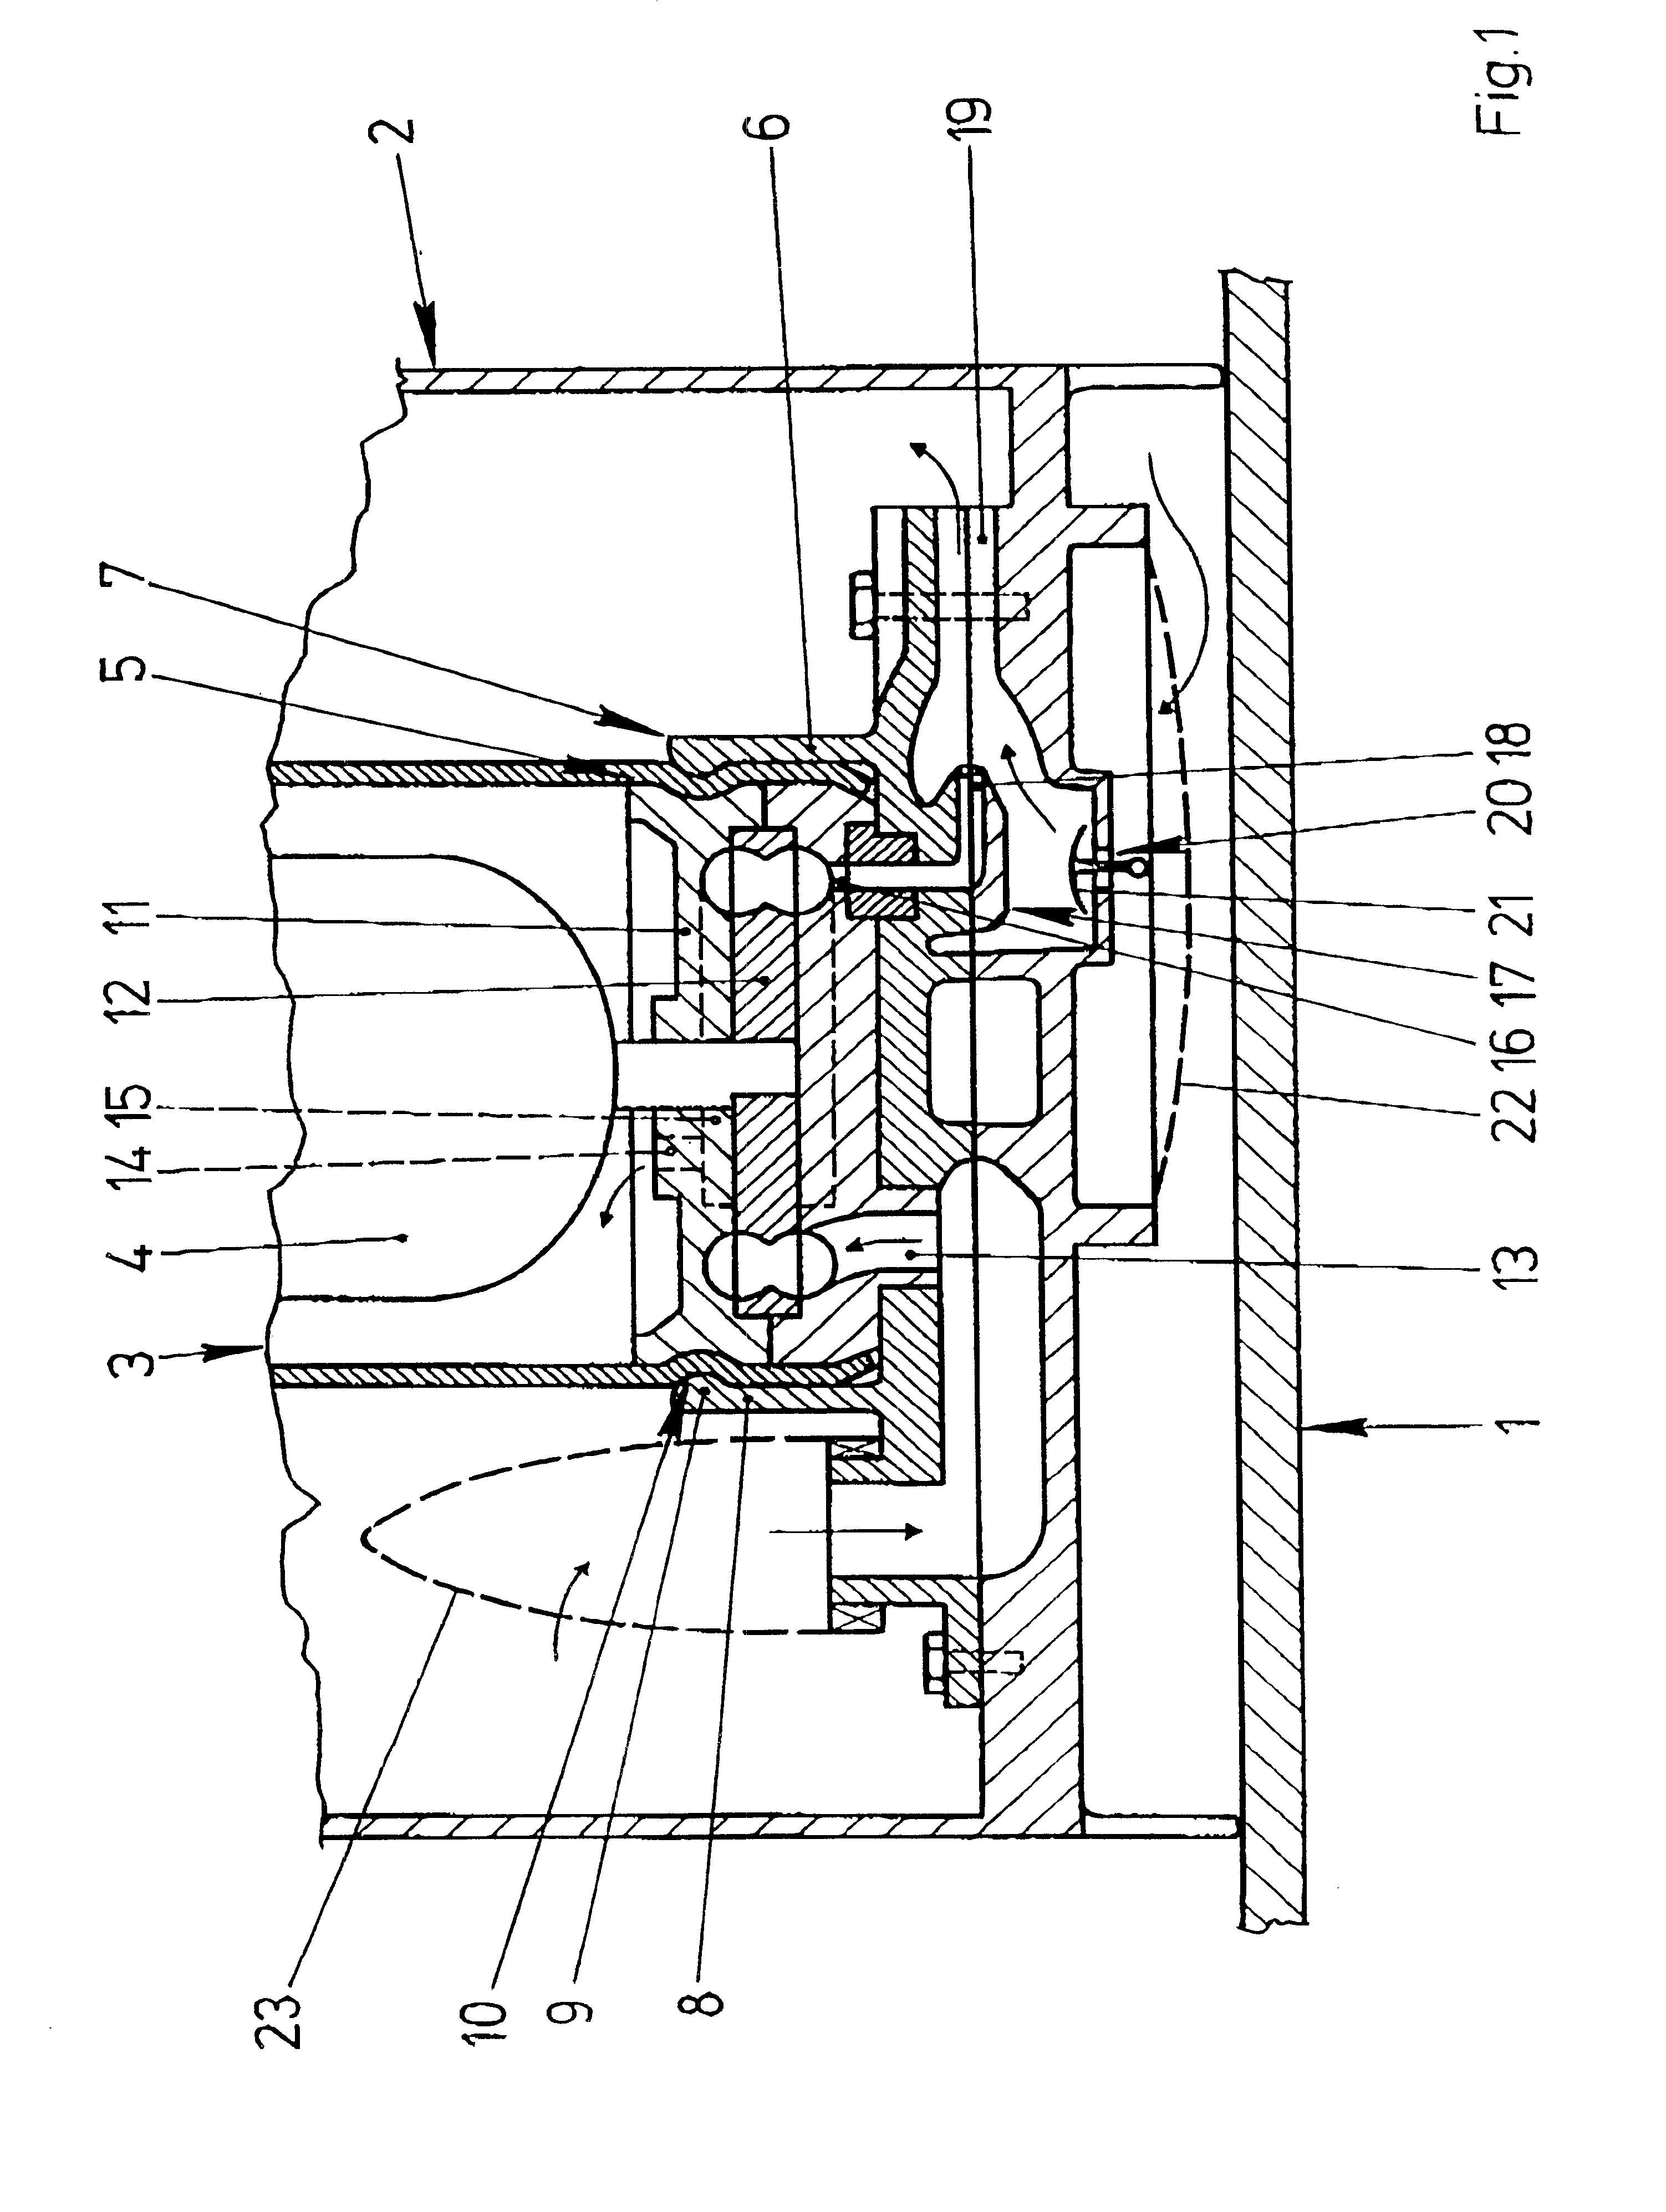 Delivery unit arranged in a surge chamber of a fuel tank of a motor vehicle